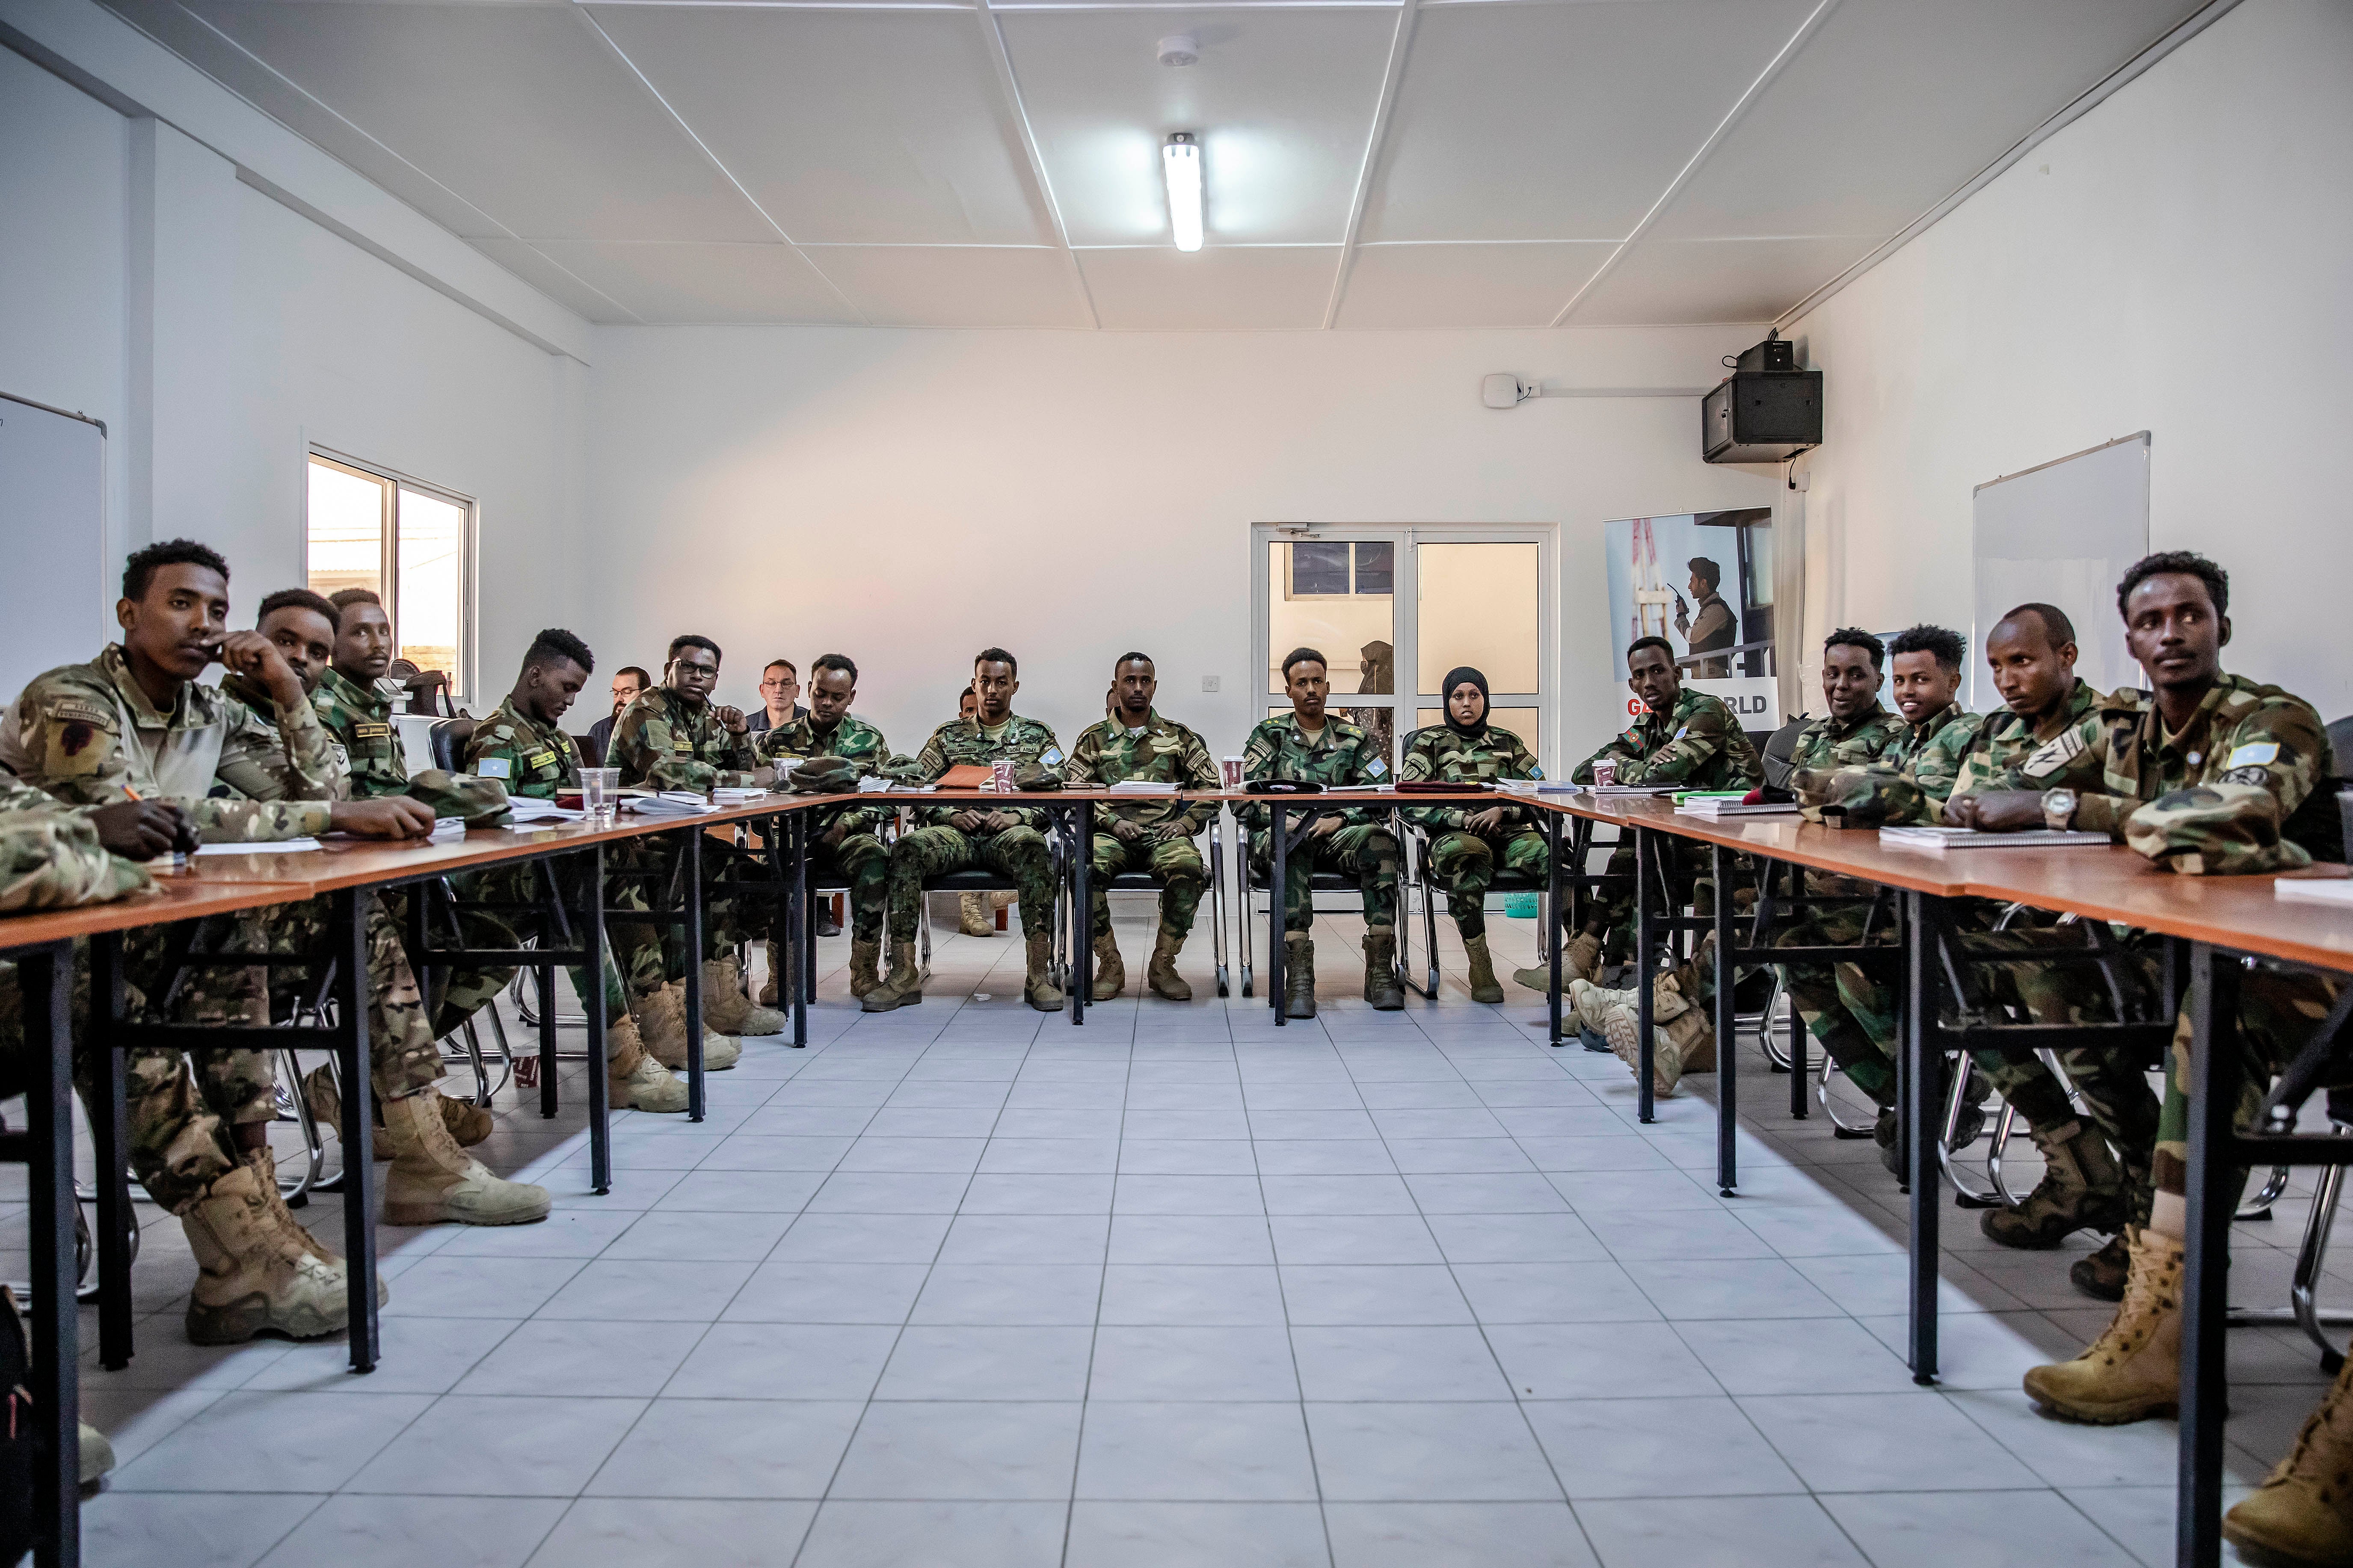 Members of the Somali army's Danab commando unit attend a training session led by US army officers in Mogadishu